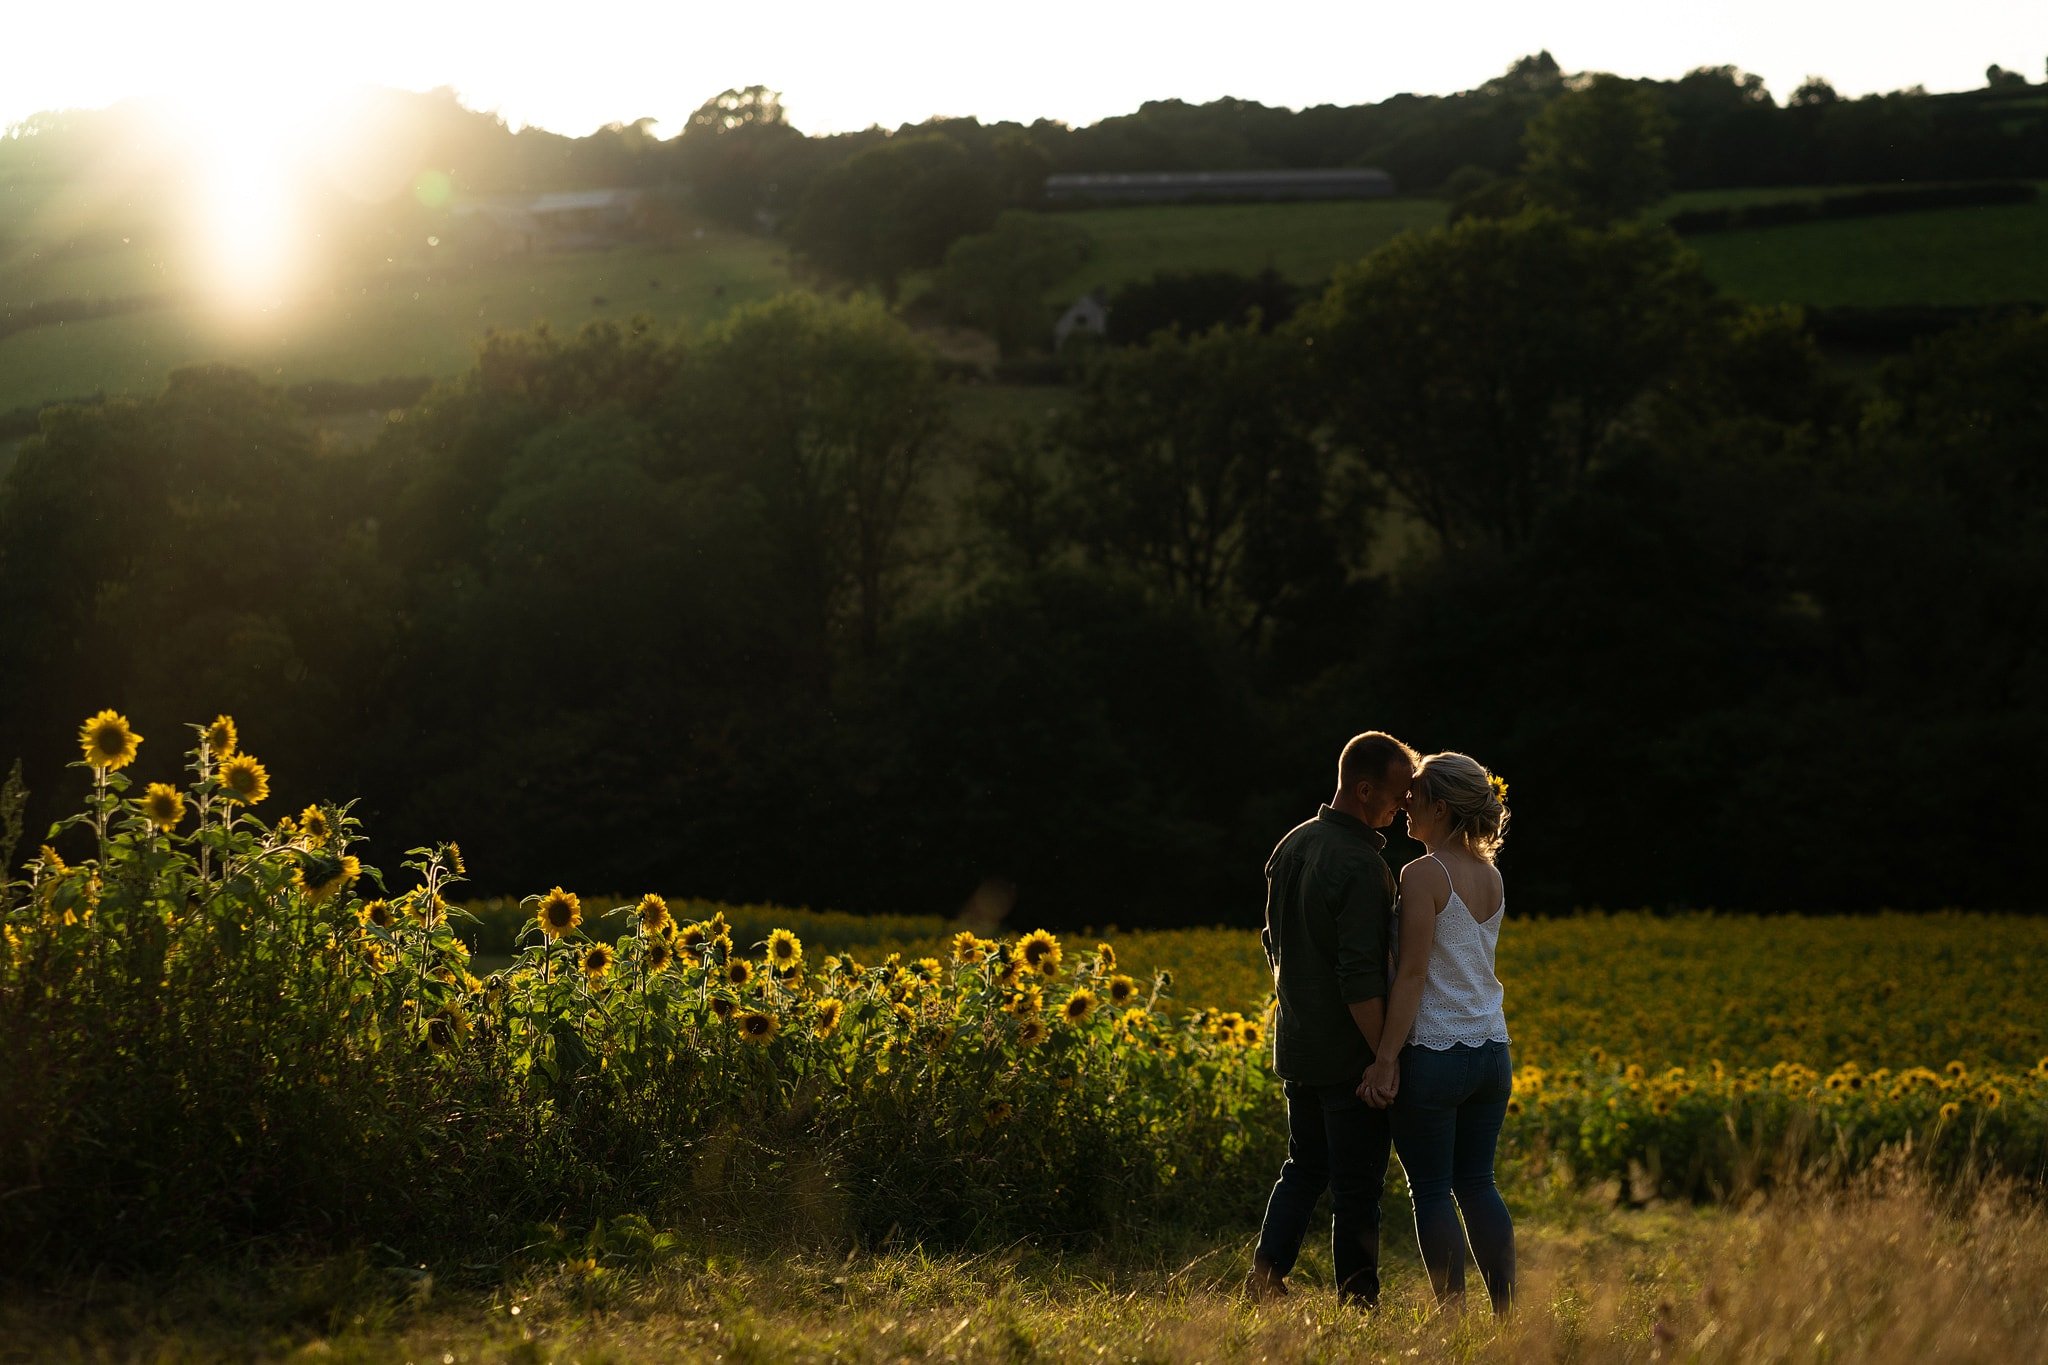 Sunset showering couple with golden light in filed of sunflowers